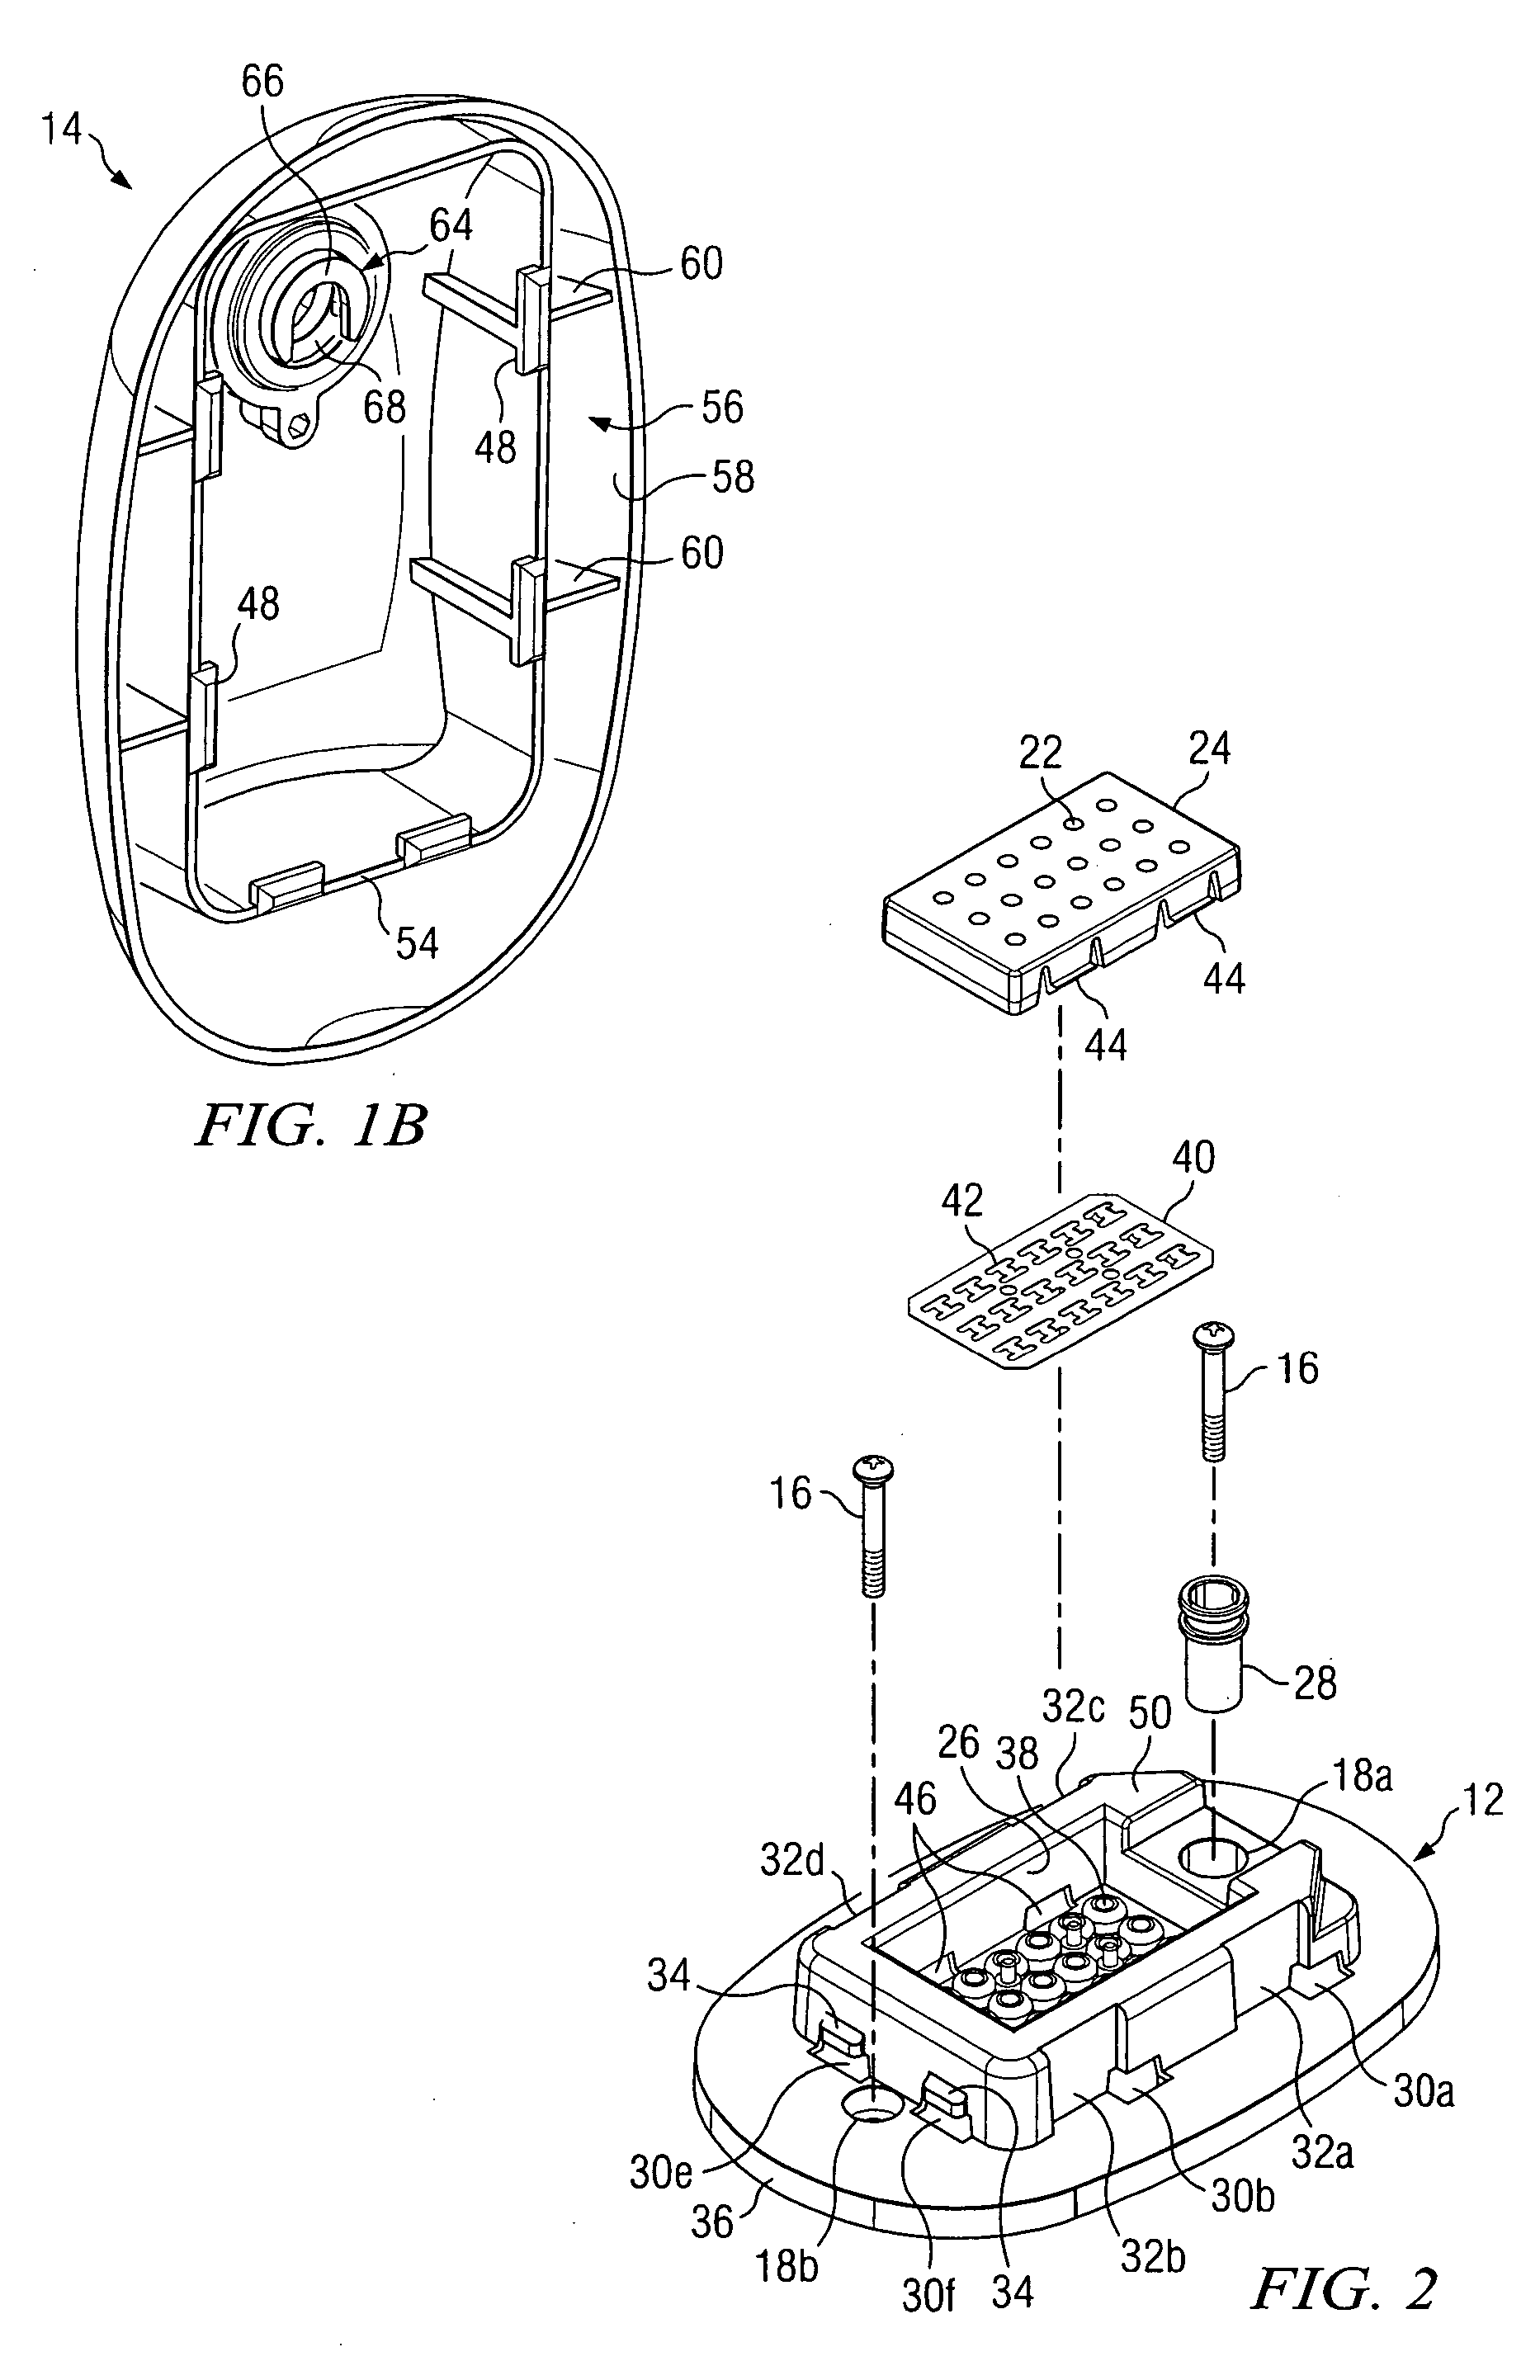 Port cover for a system integrated into a structure for injection of a material into one or more cavities in the structure